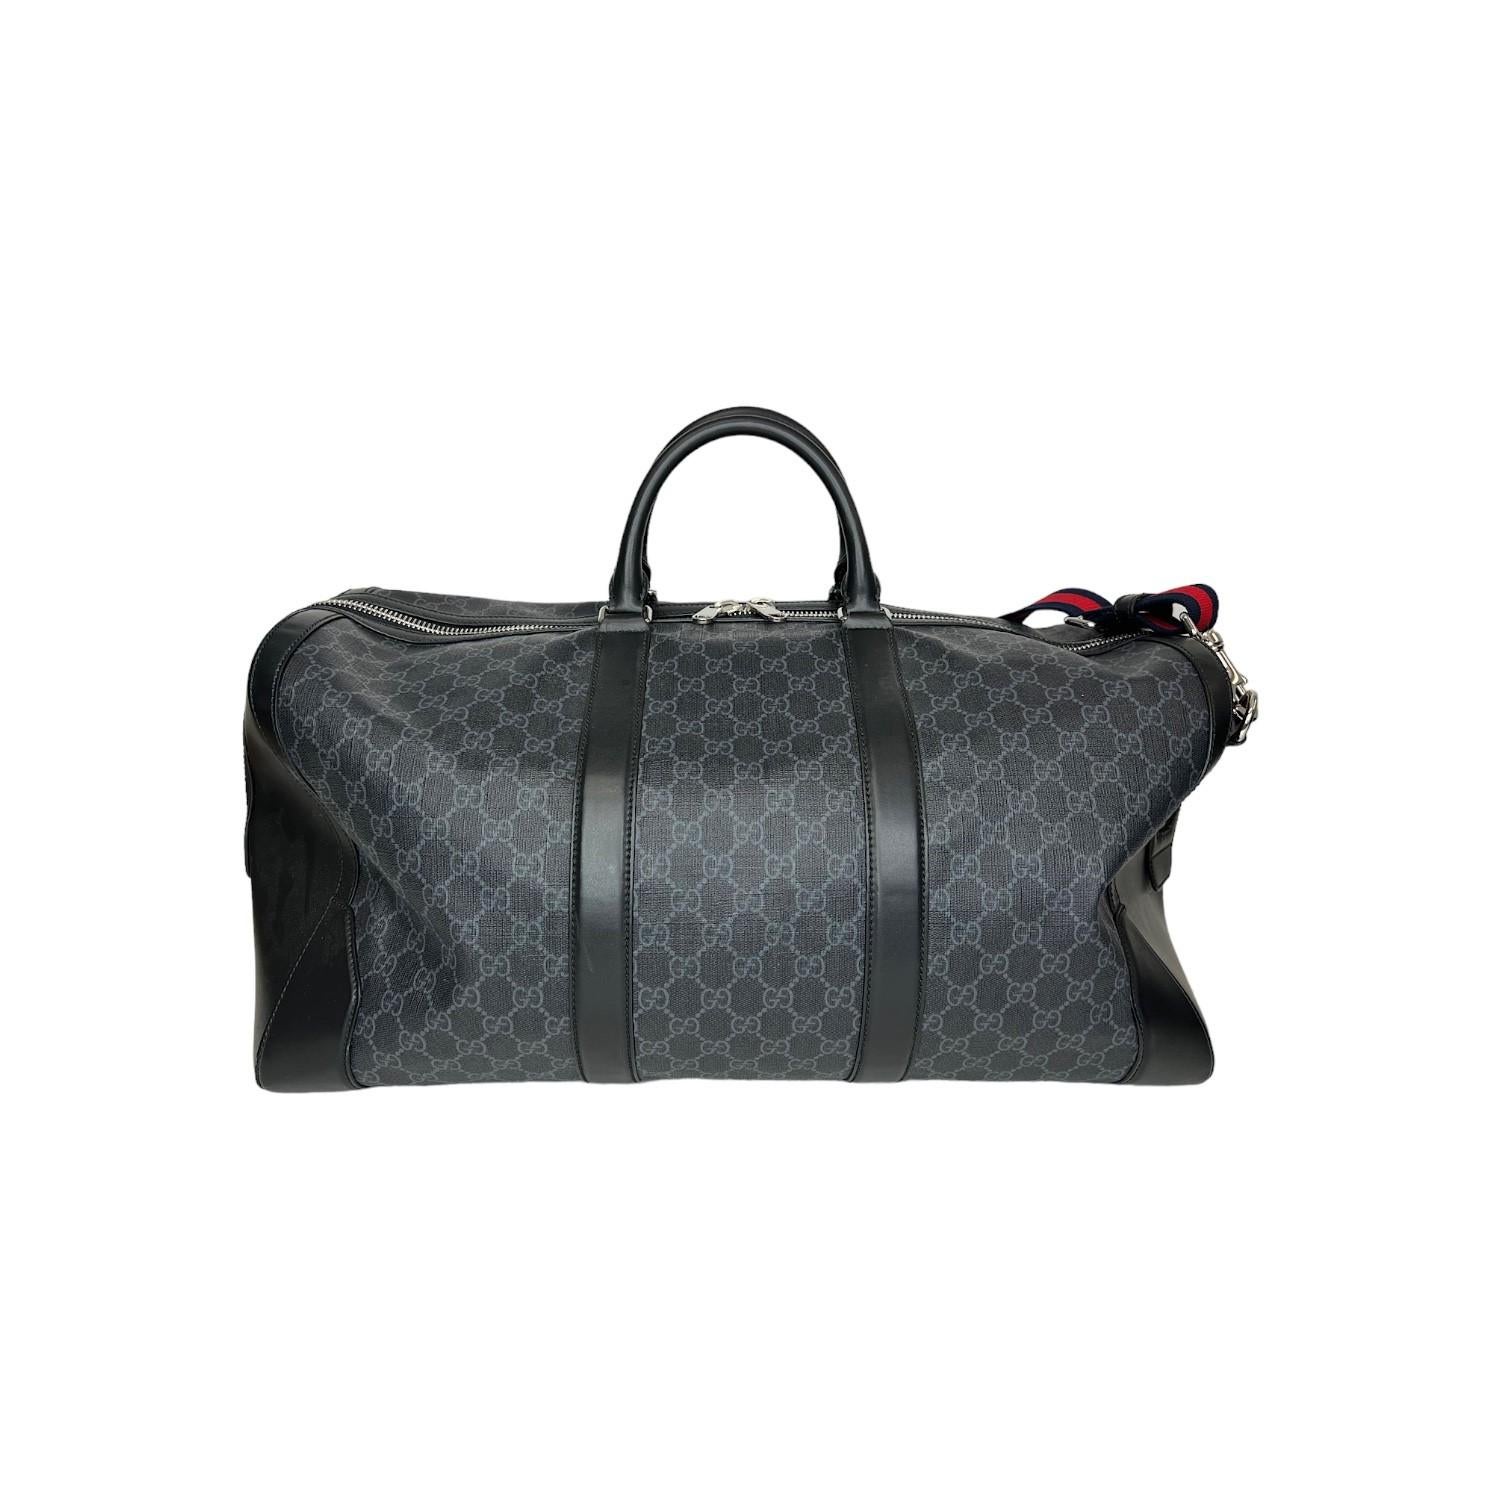 This Gucci duffle bag was made in Italy and it is finely crafted of Gucci's popular black GG Supreme coated canvas with black leather trimmings and silver-tone hardware features. It has rolled black leather top handles and it comes with a removeable